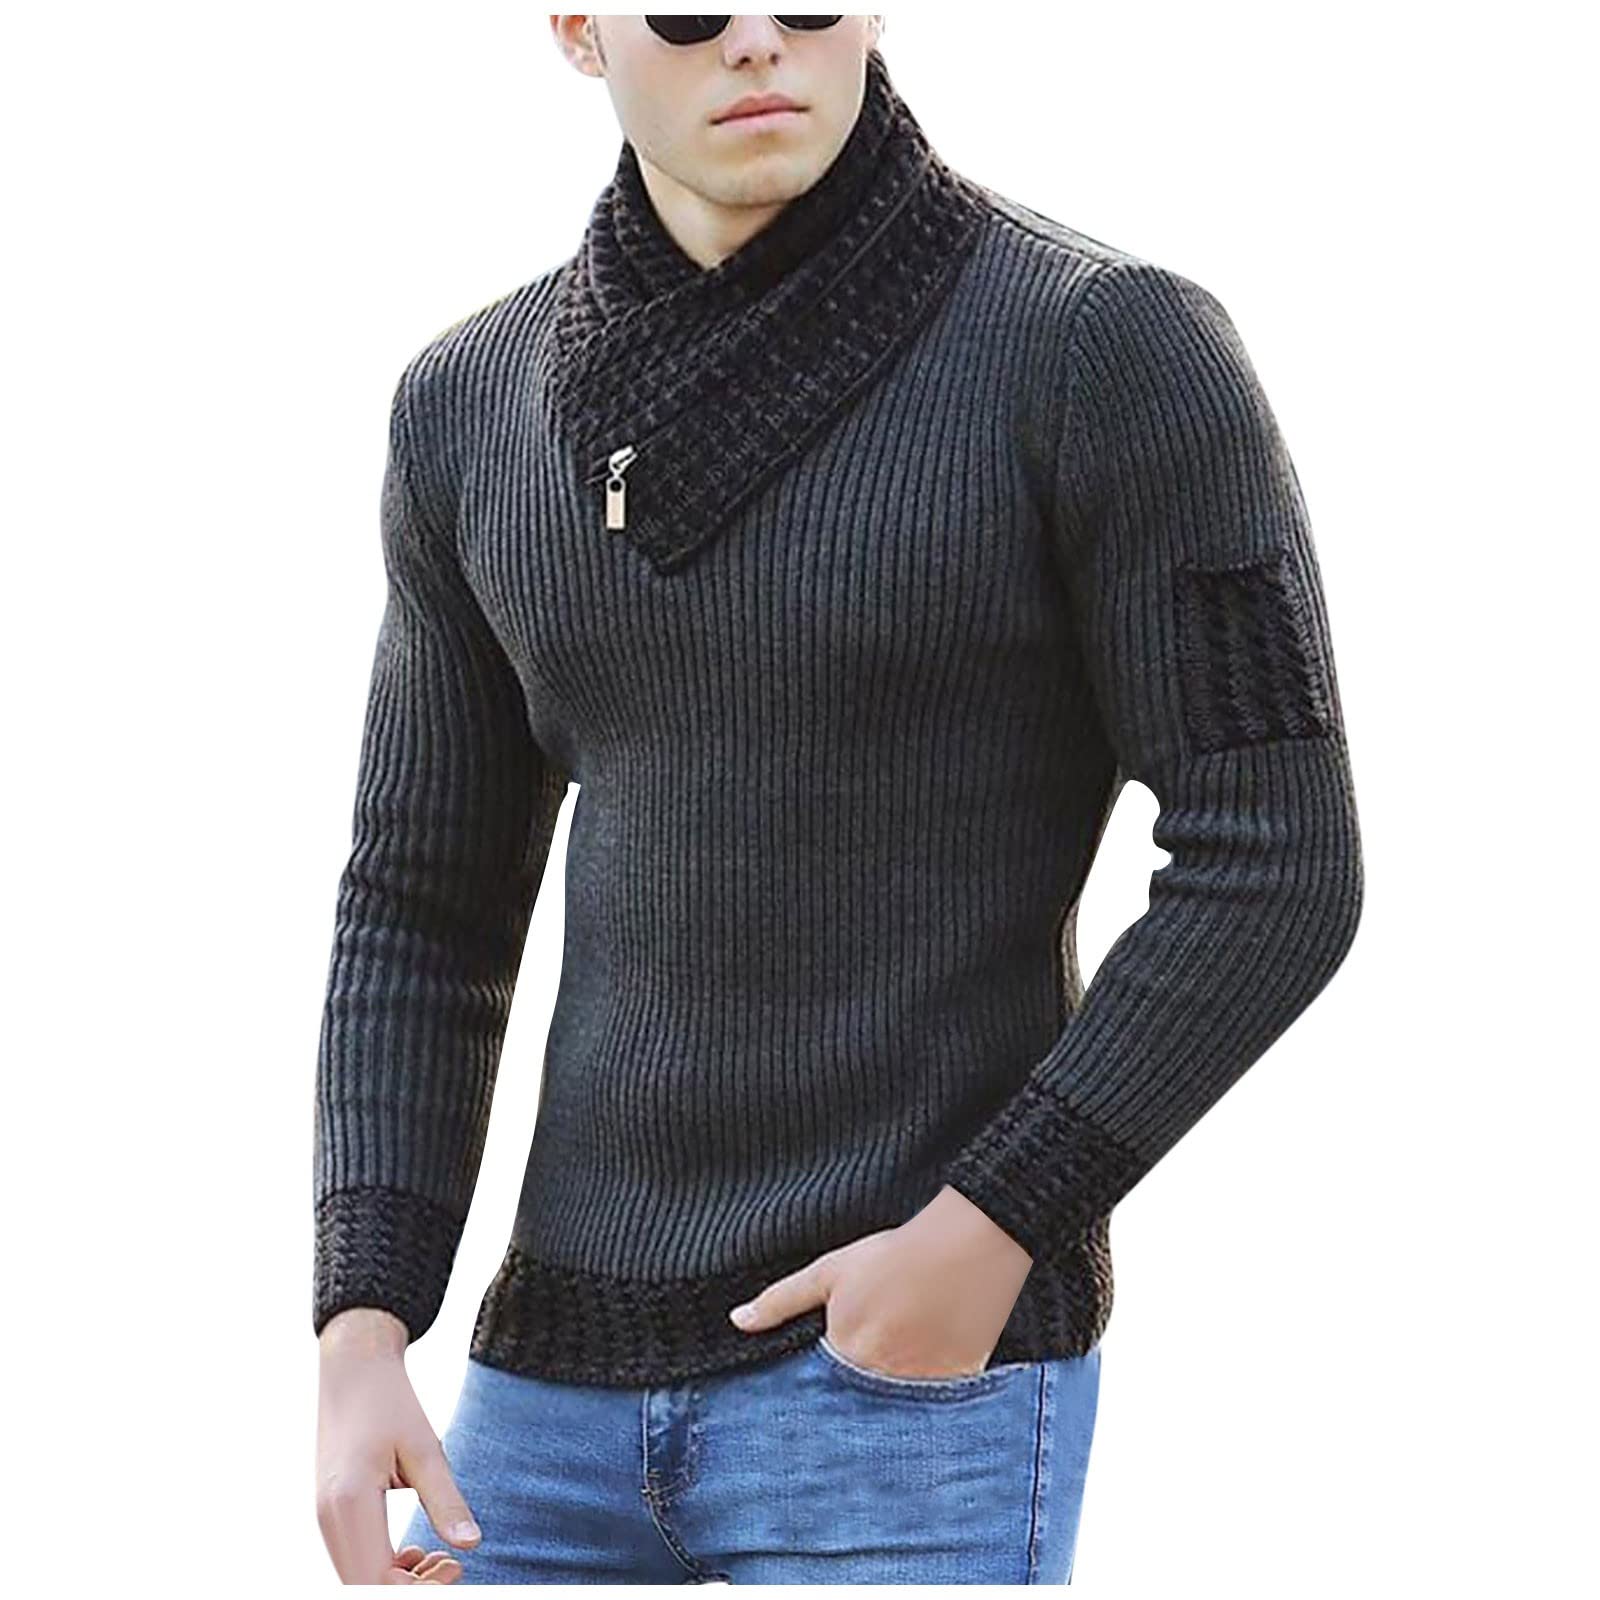 XIAXOGOOL Turtle Neck Sweaters for Men,Men Knitted Hoodies Pullover Casual Long Sleeve Turtleneck Sweaters with Drawstring